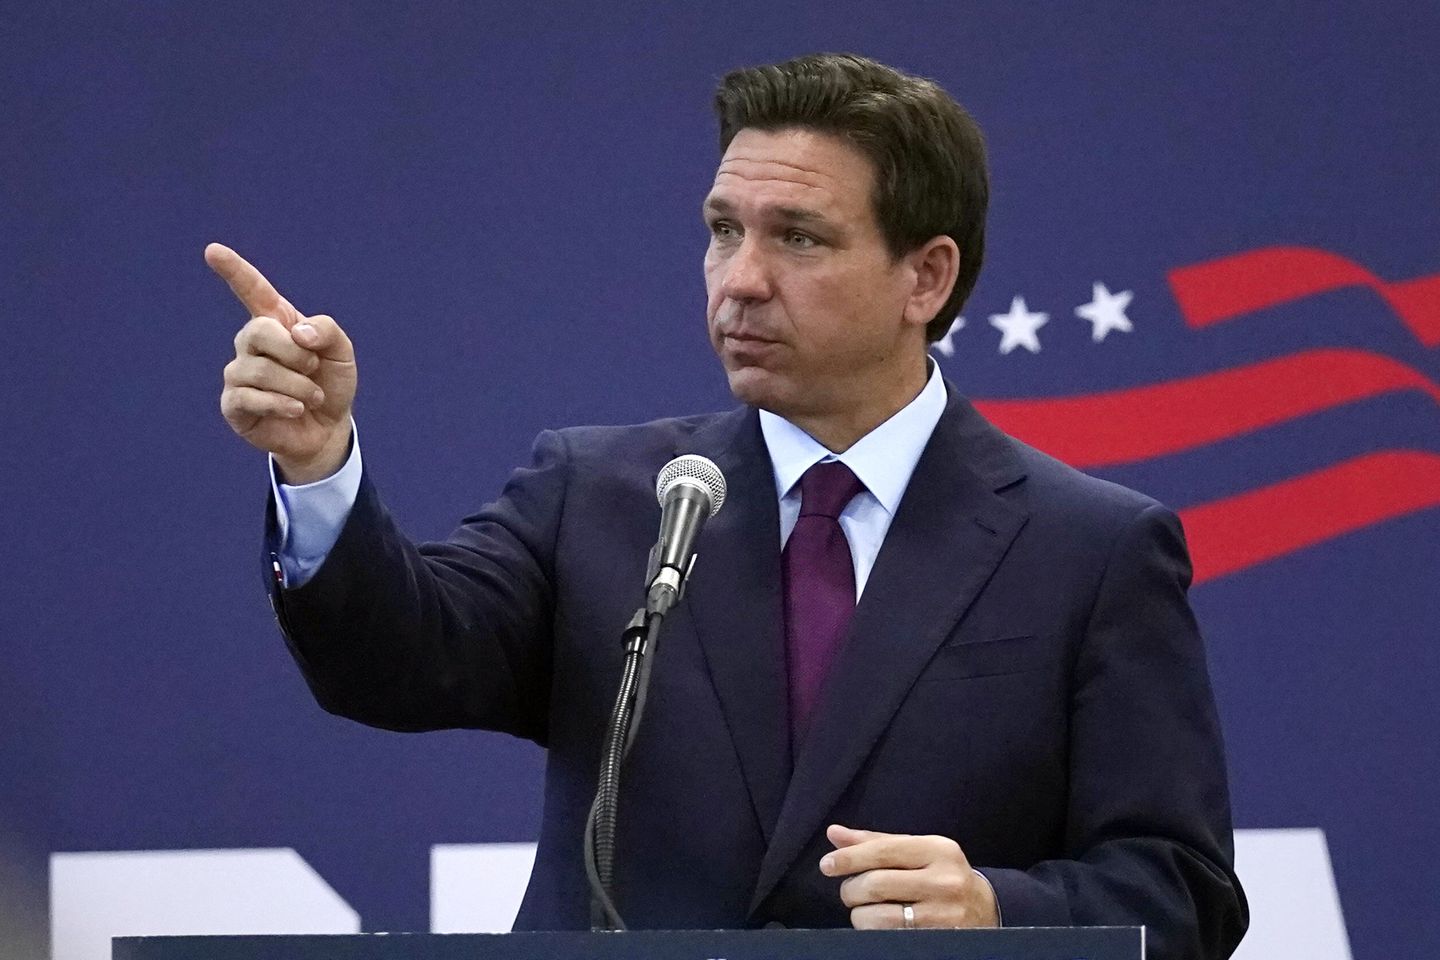 Ron DeSantis accepts Gavin Newsom's challenge to debate: 'Absolutely, I'm game'